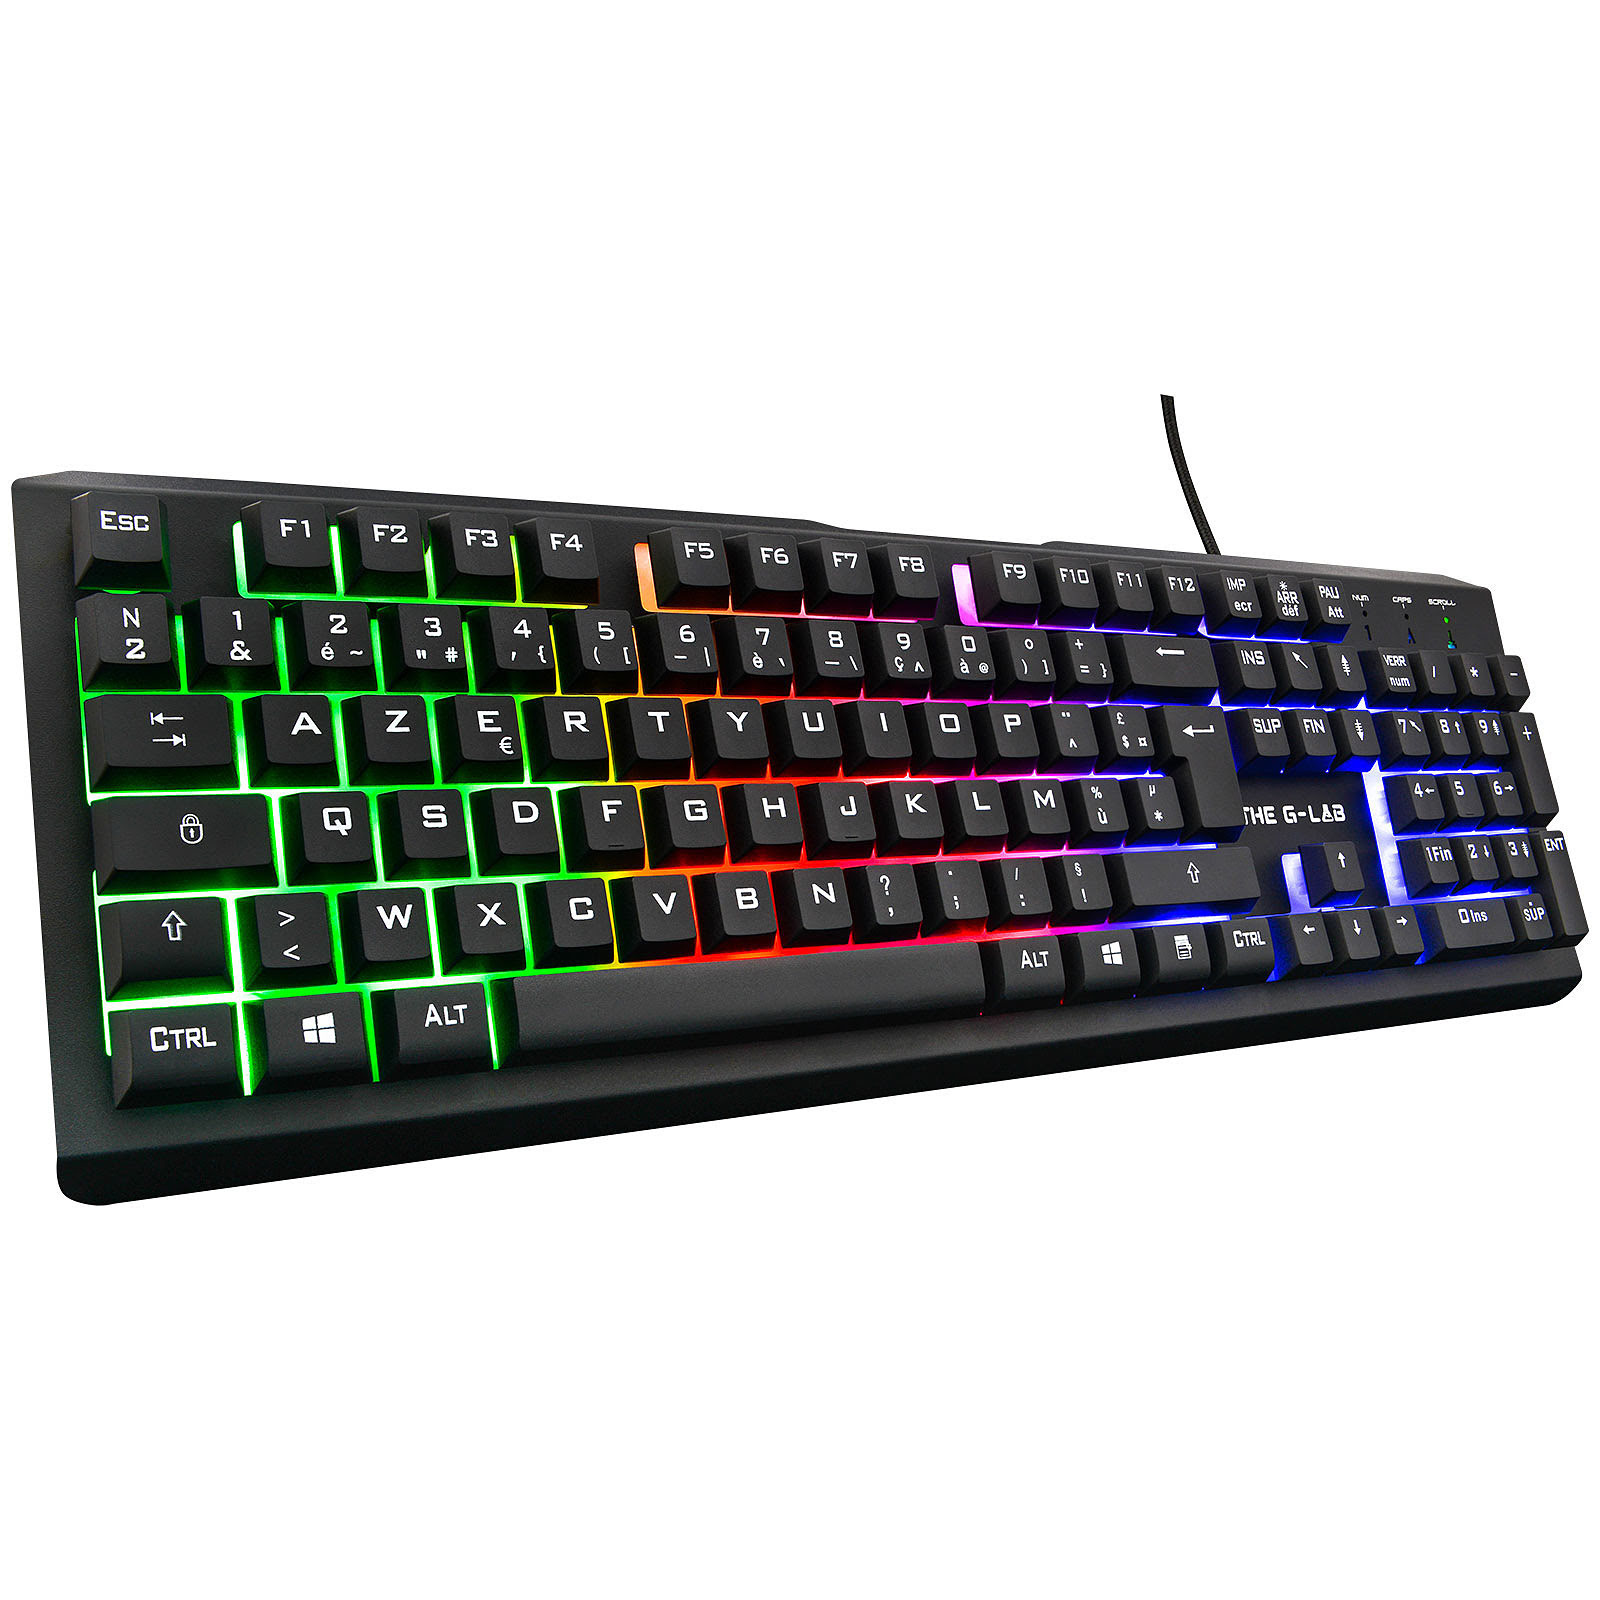 Pack CLAVIER/SOURIS THE G-LAB COMBO TUNGSTEN (Souris / Clavier / SA